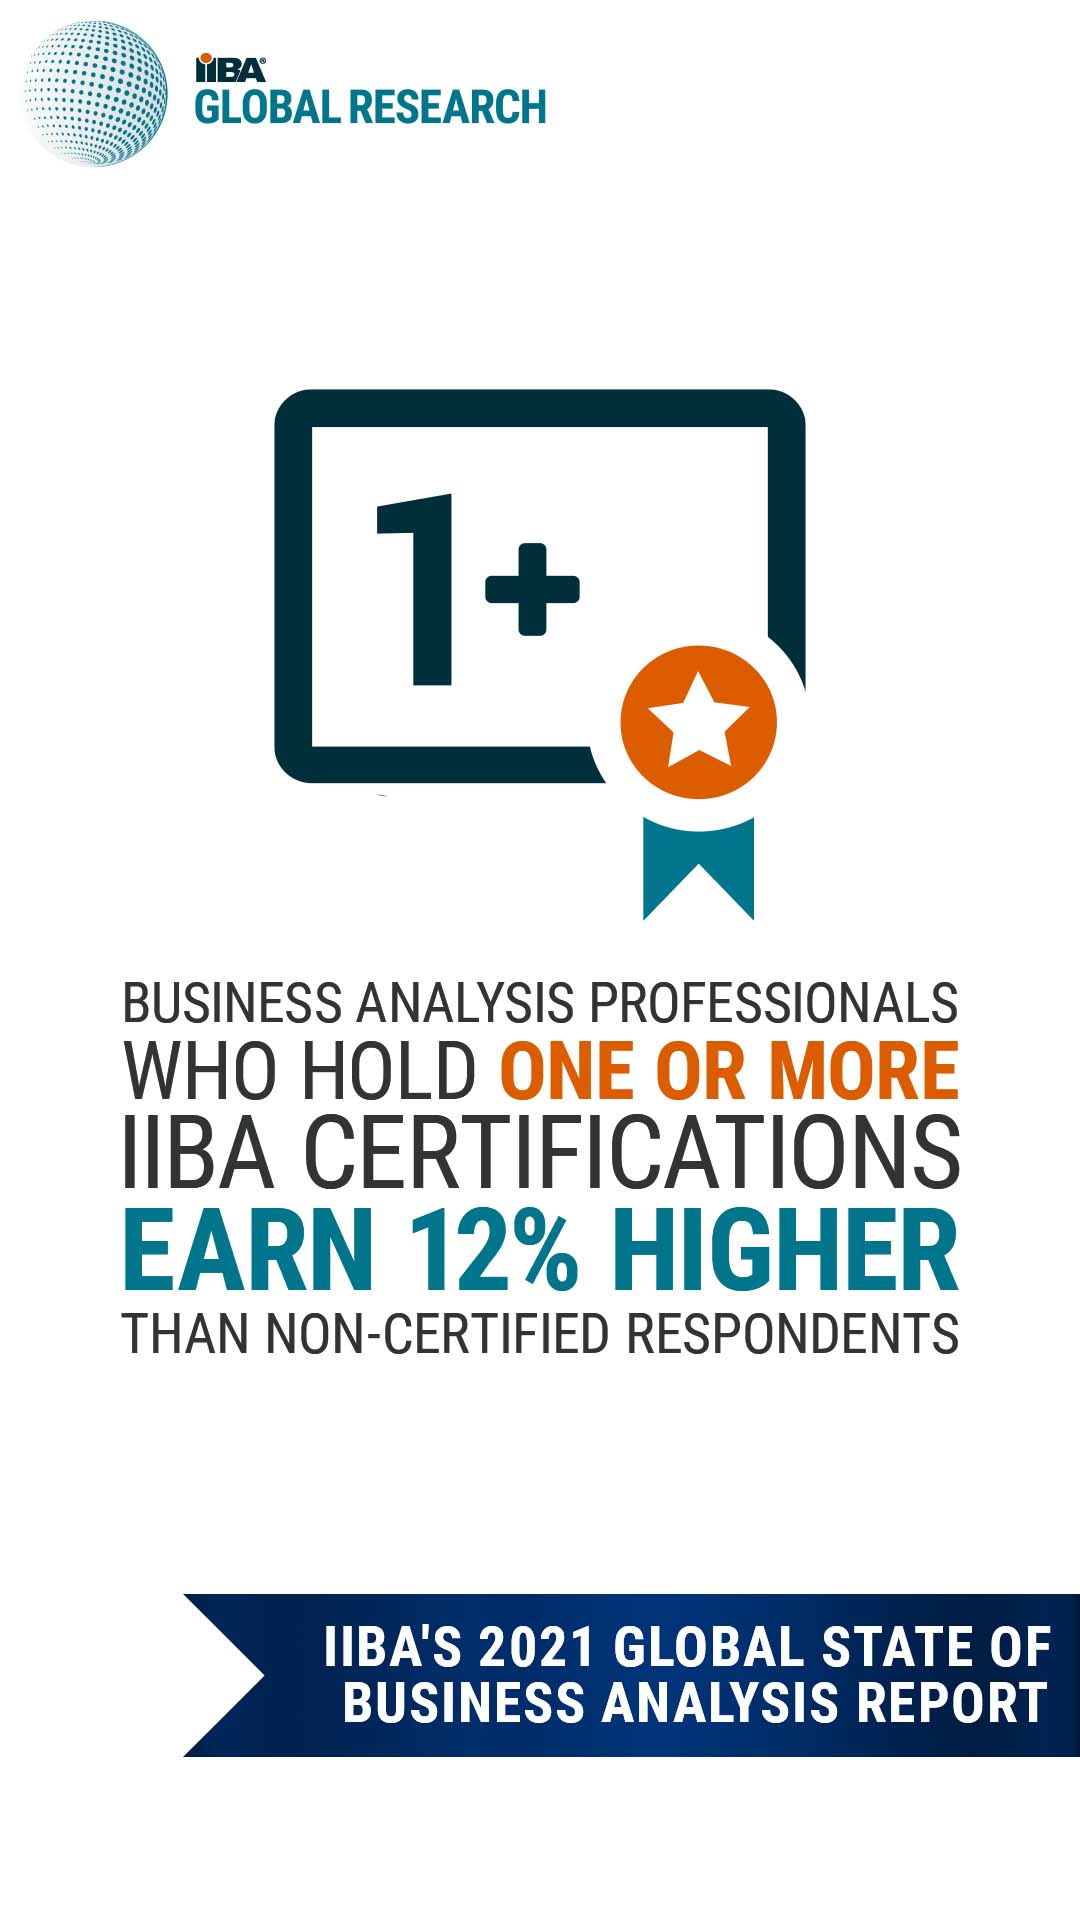 Business analysis professionals who hold one or more IIBA certifications earn 12% higher than non-certified respondents